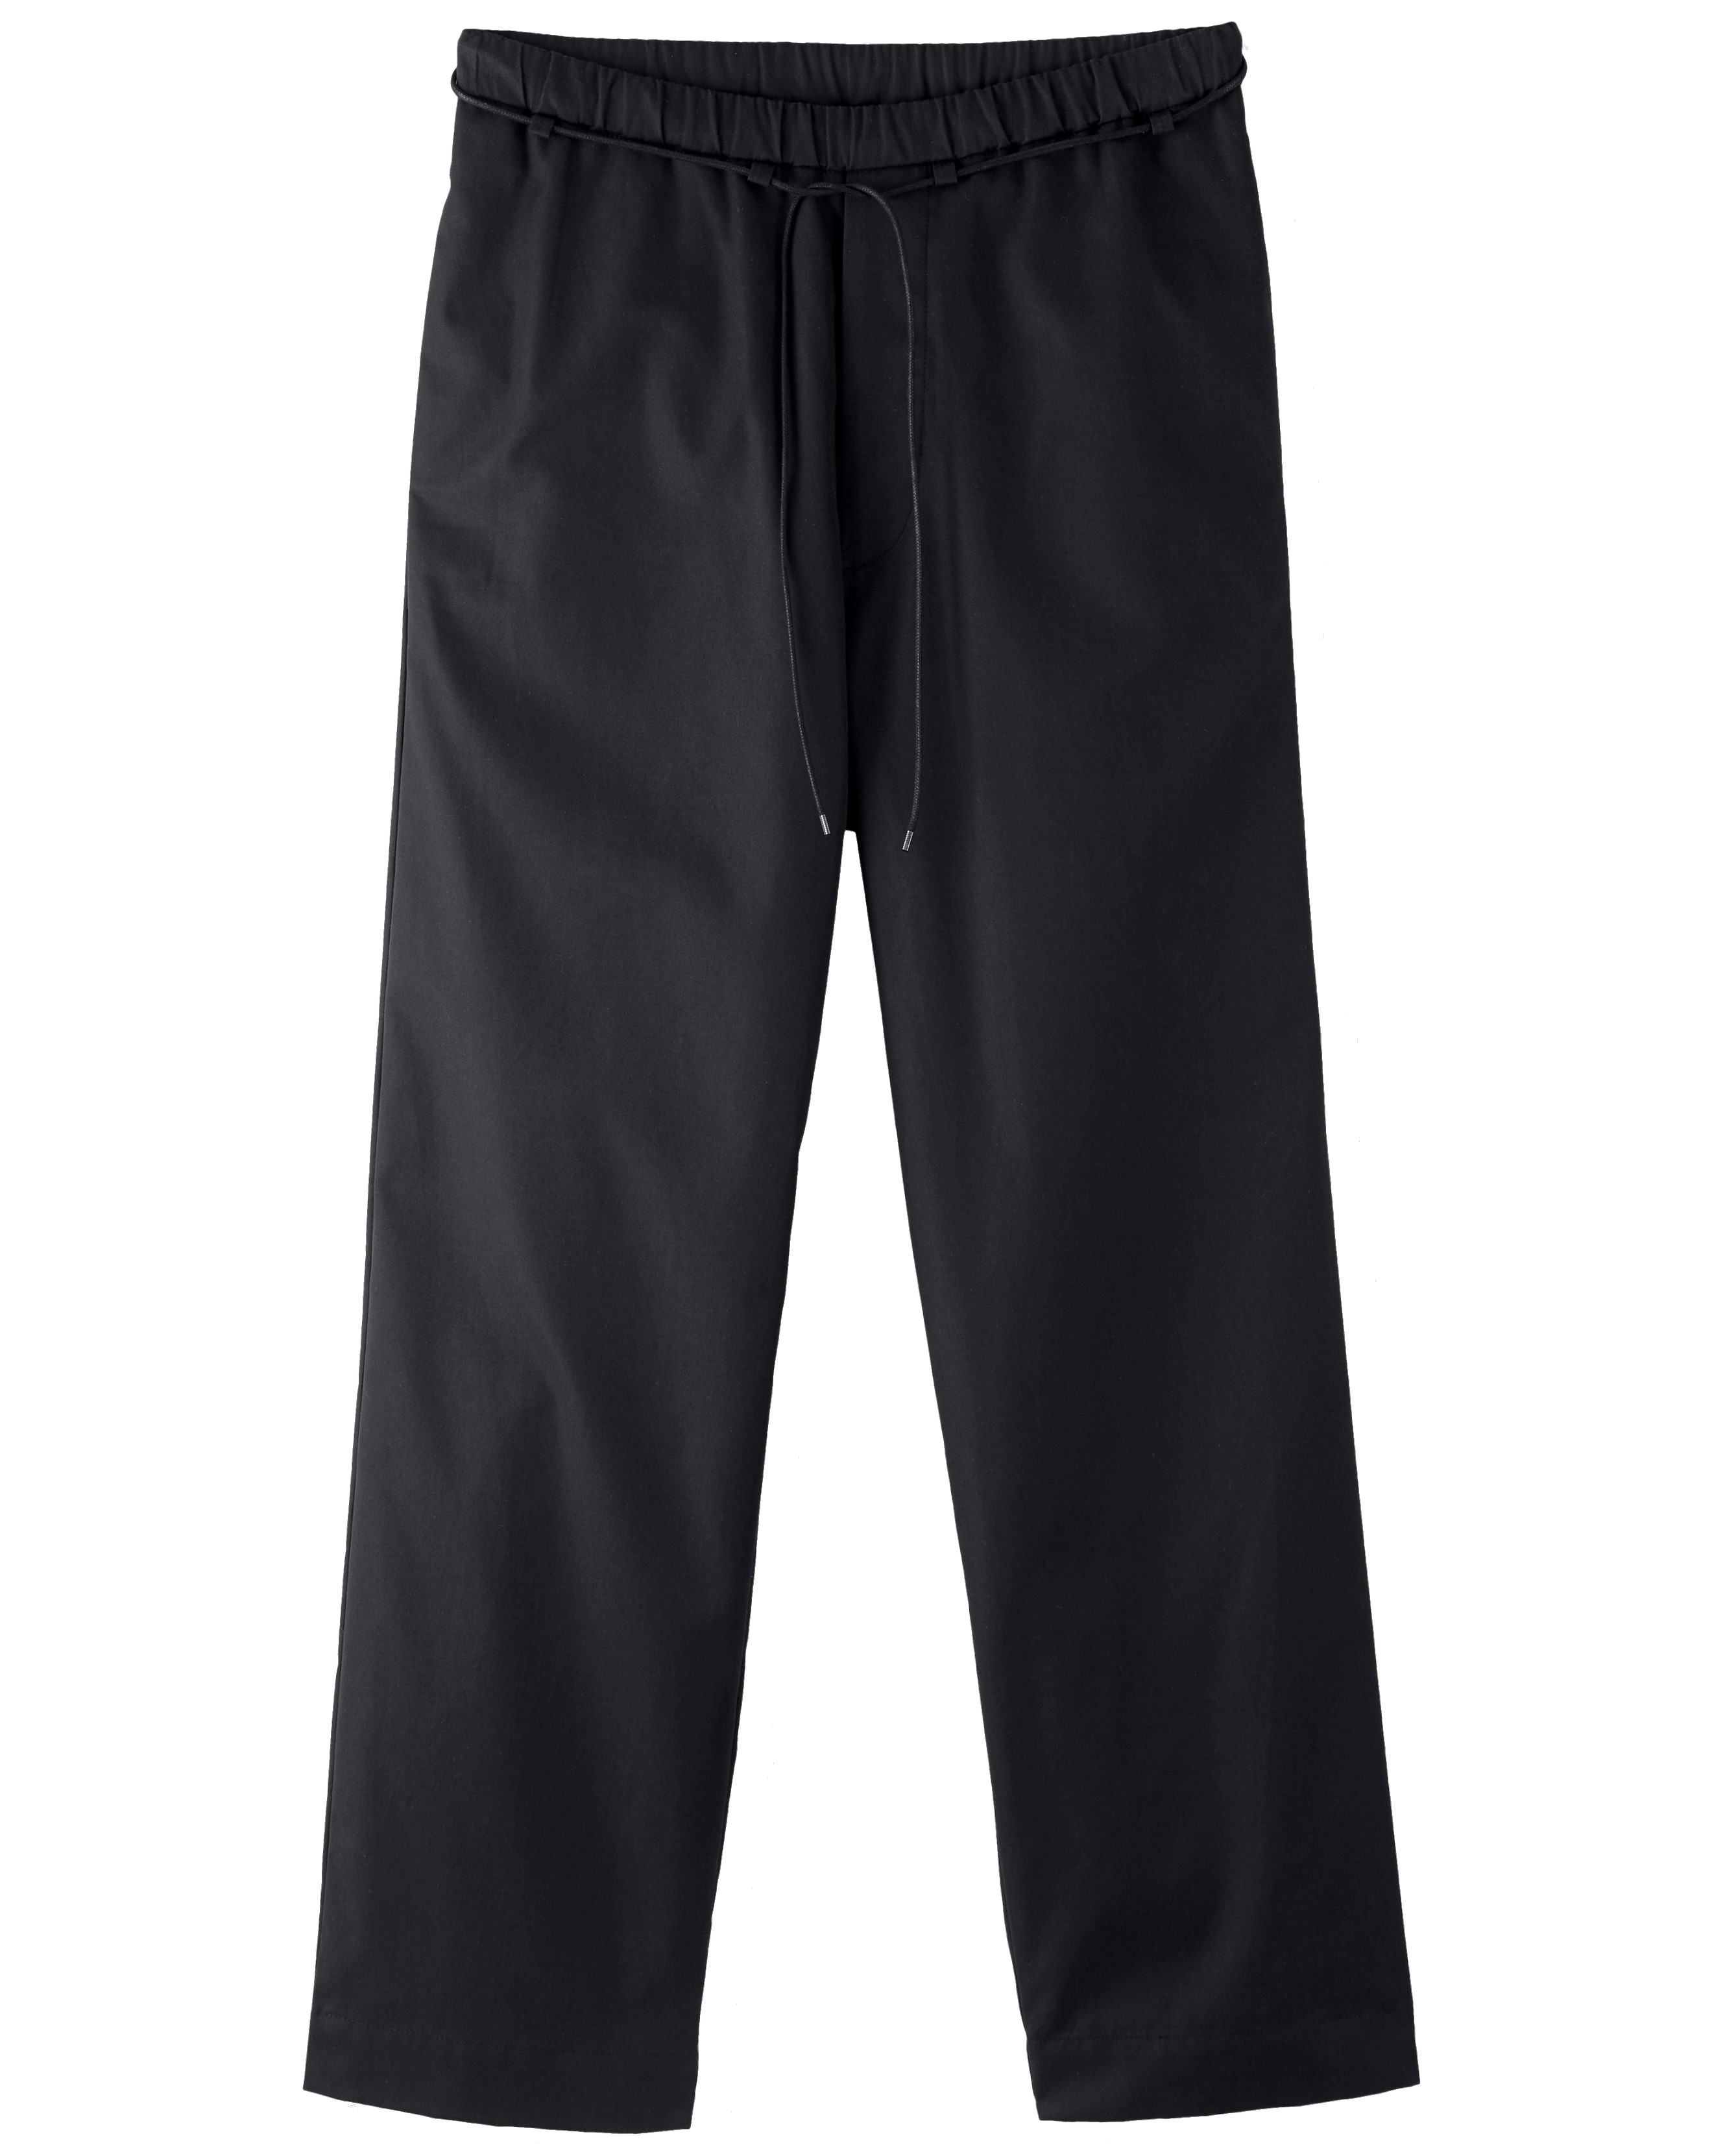 APPLIED ART FORMS Drawstring Pant in Black